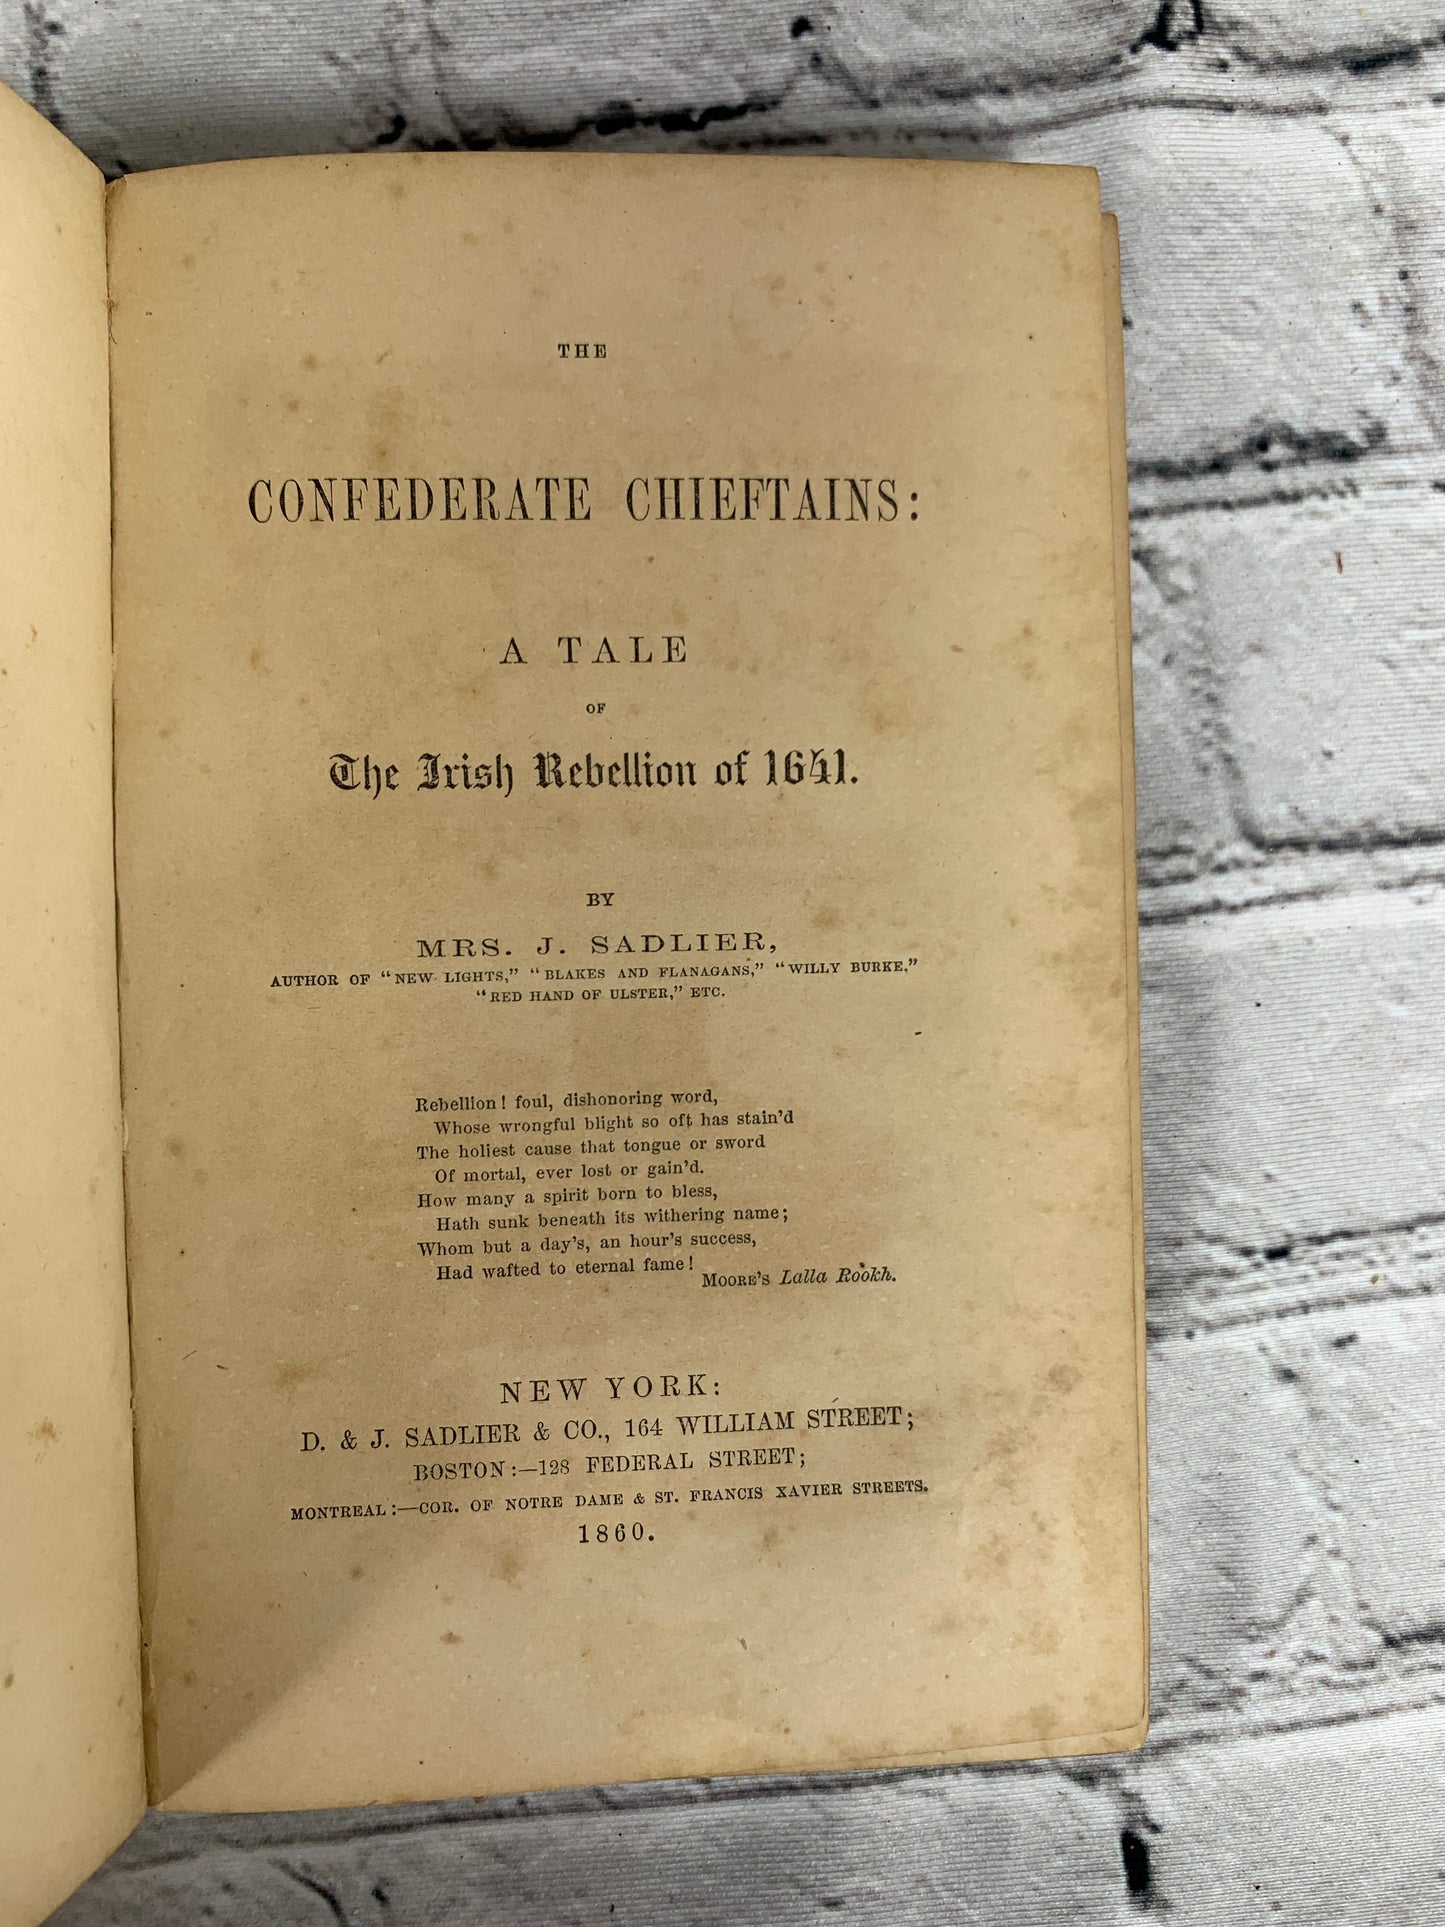 The Confederate Chieftians Tale of the Irish Rebellion of 1641 by Sadlier [1860]